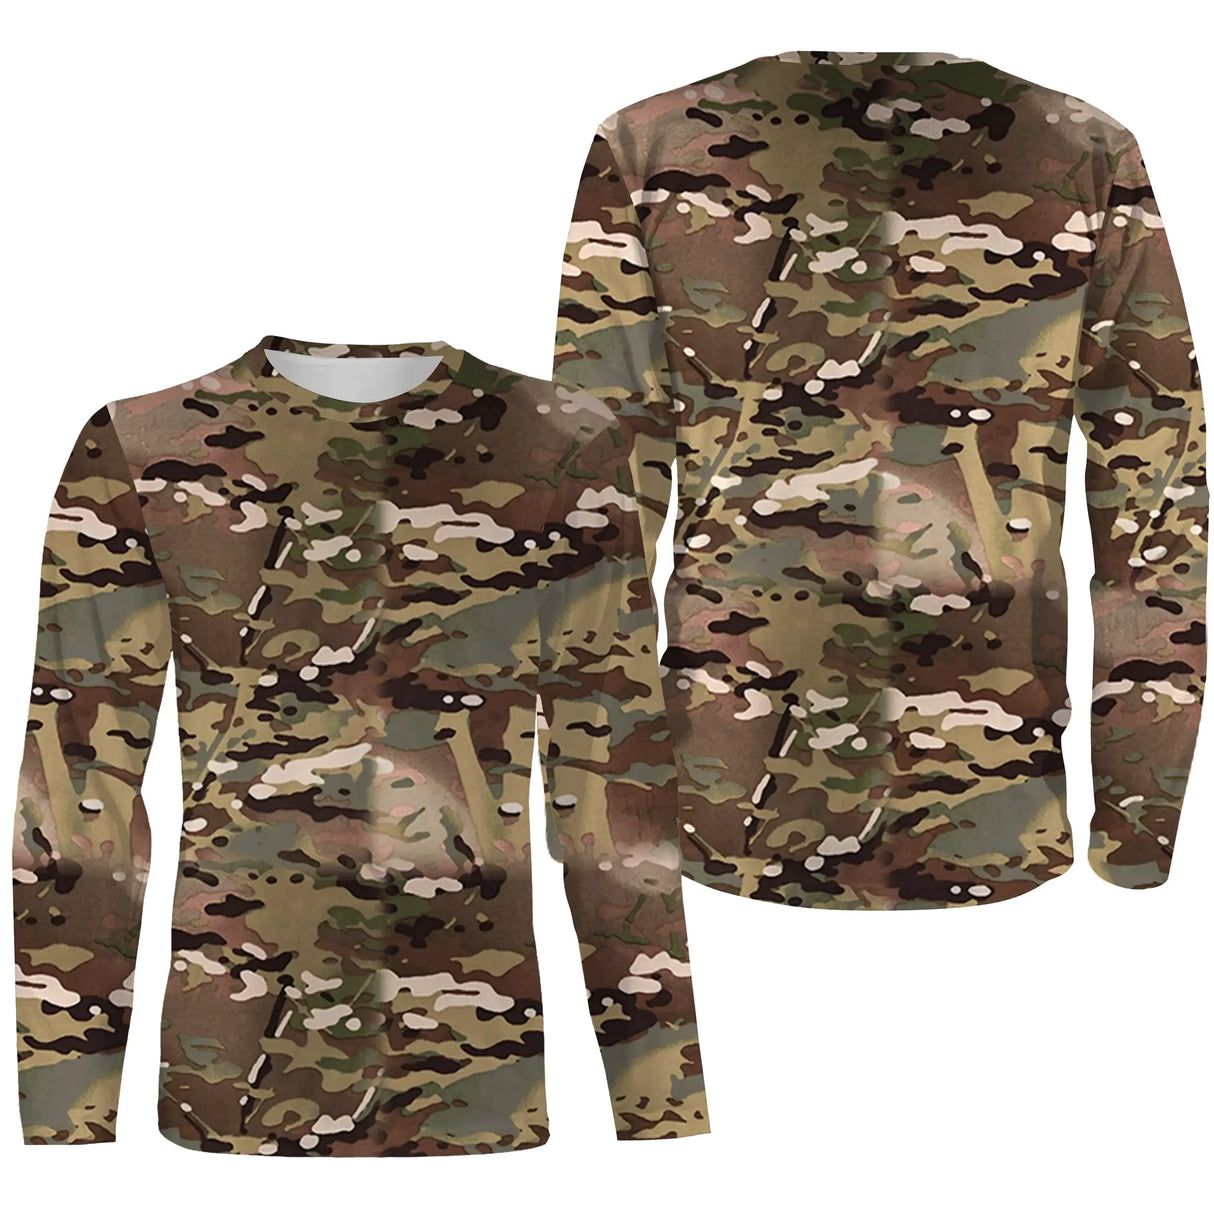 Camouflage Fishing and Hunting Clothing, Gift for Fisherman, Hunter, Camouflage T-shirt, Anti-UV Hoodie - CT06072231